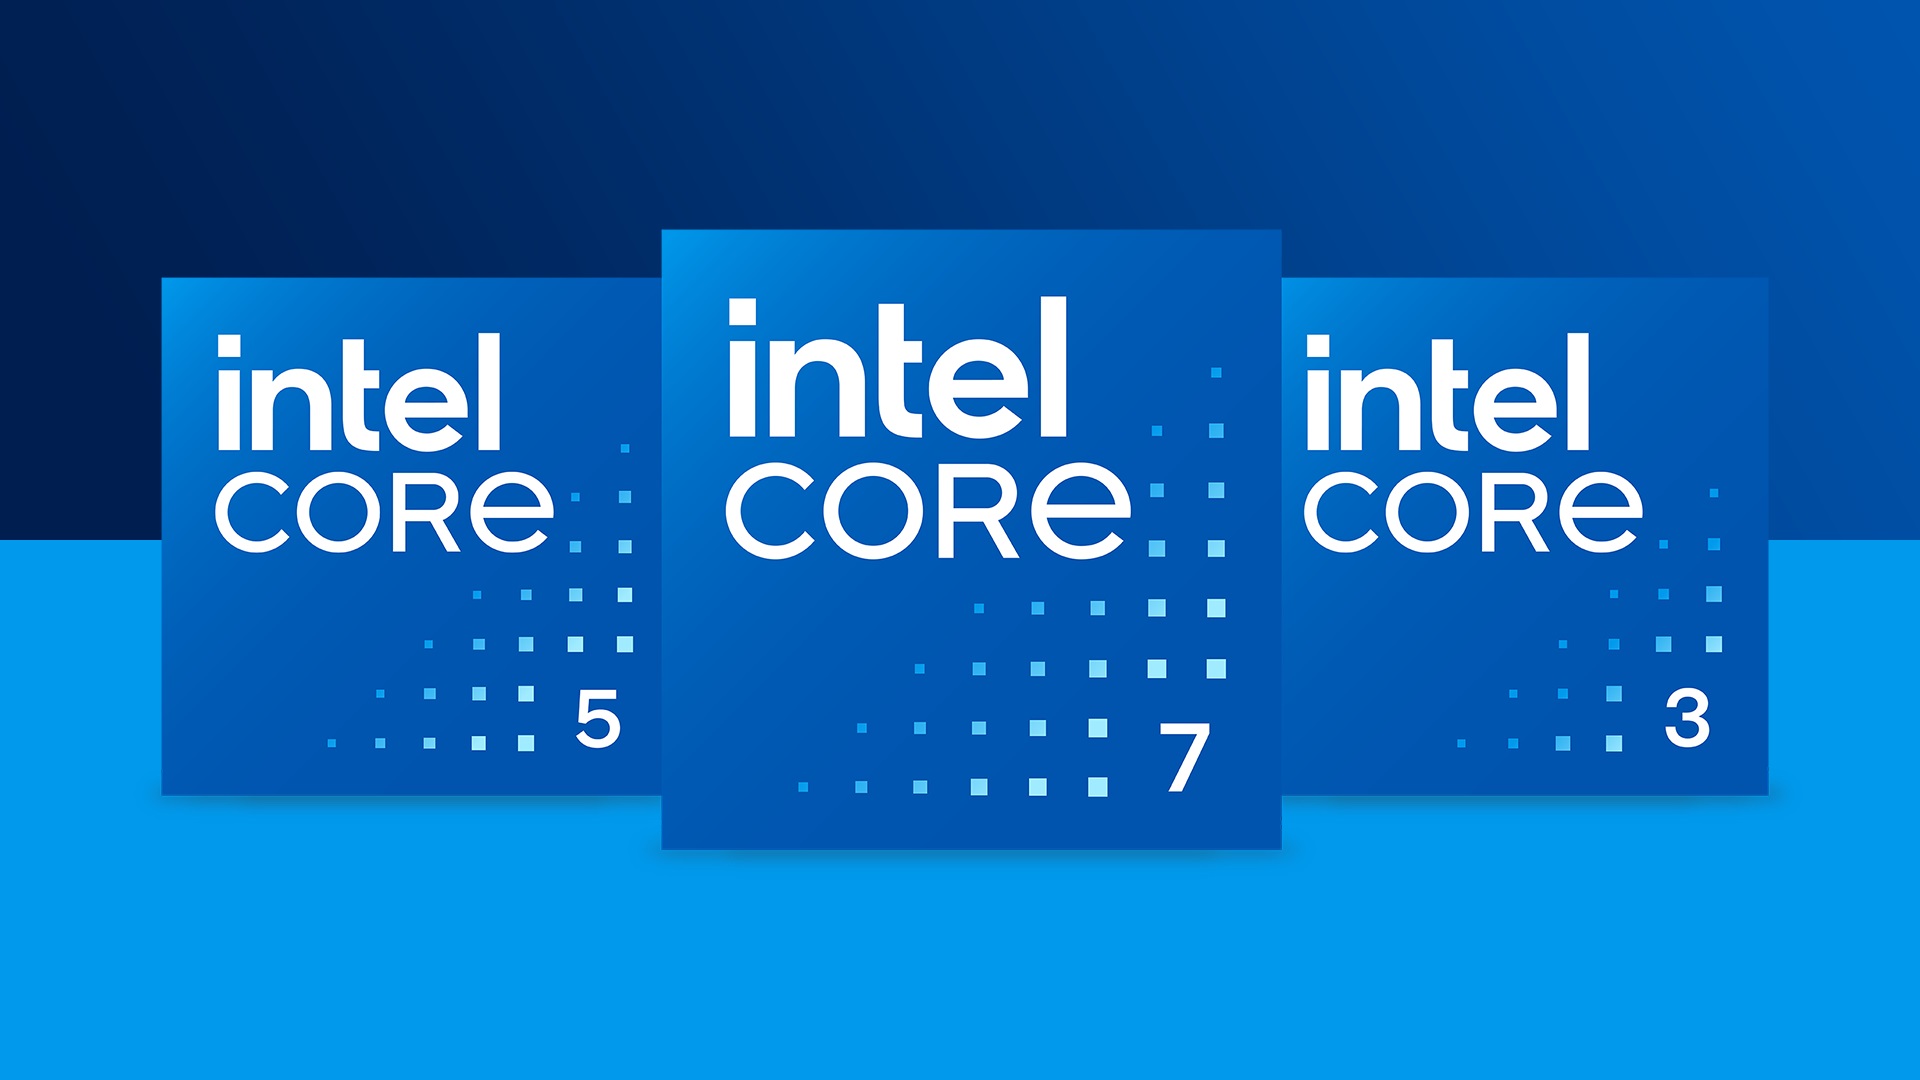 Key features of the New Processor Family Include